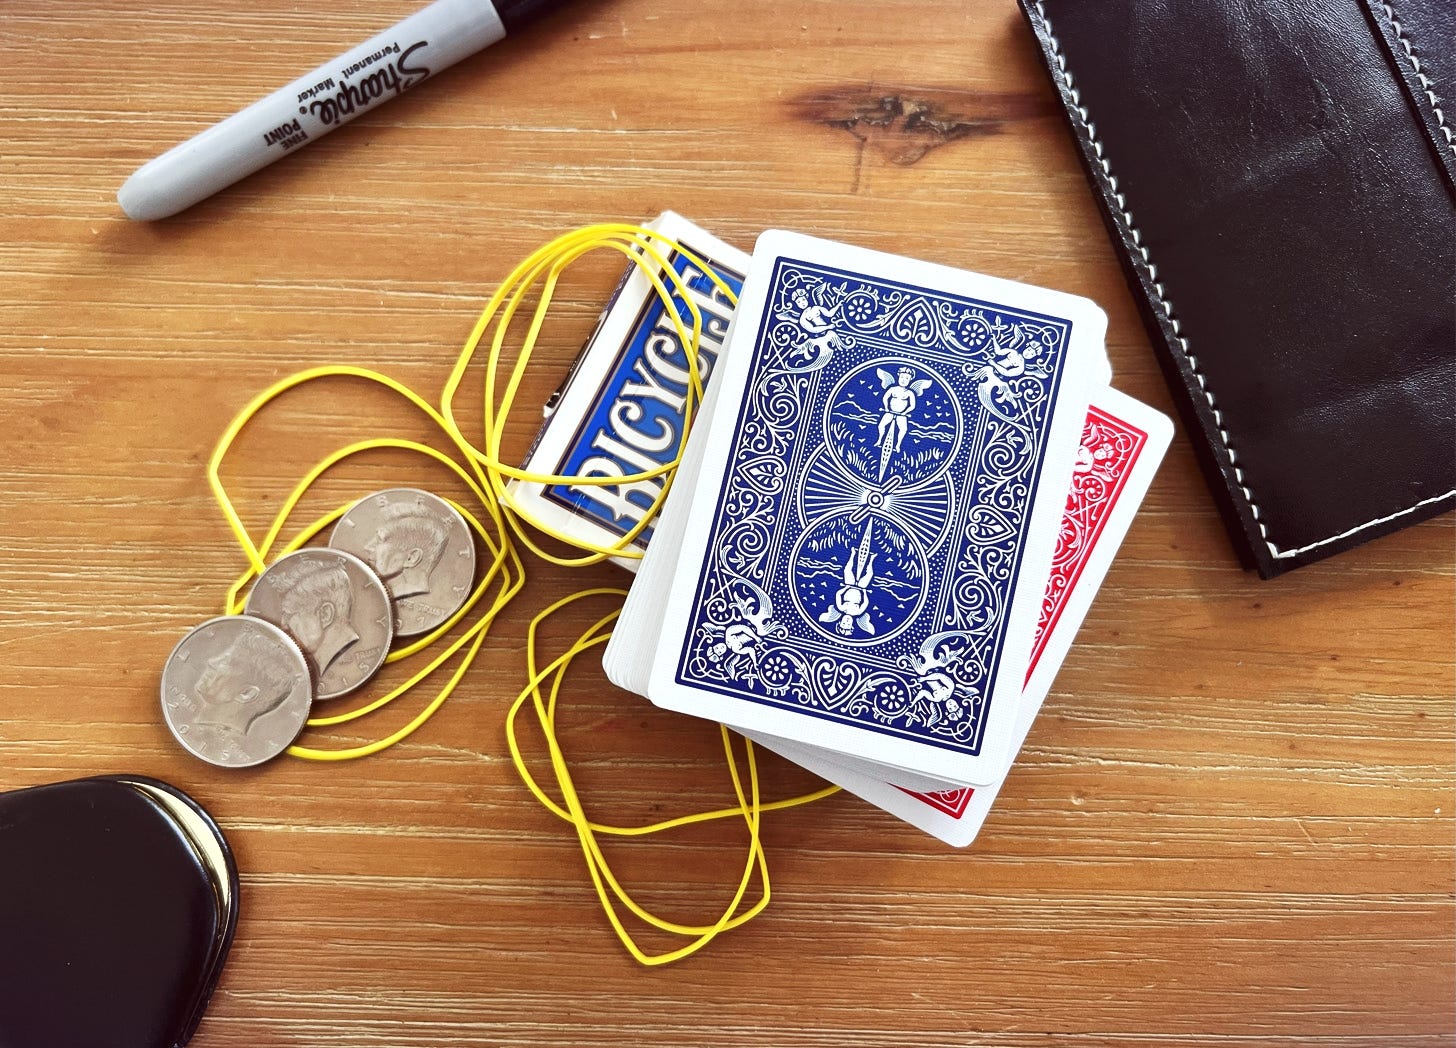 A table with deck of cards, rubber bands, coins, sharpies and a wallet